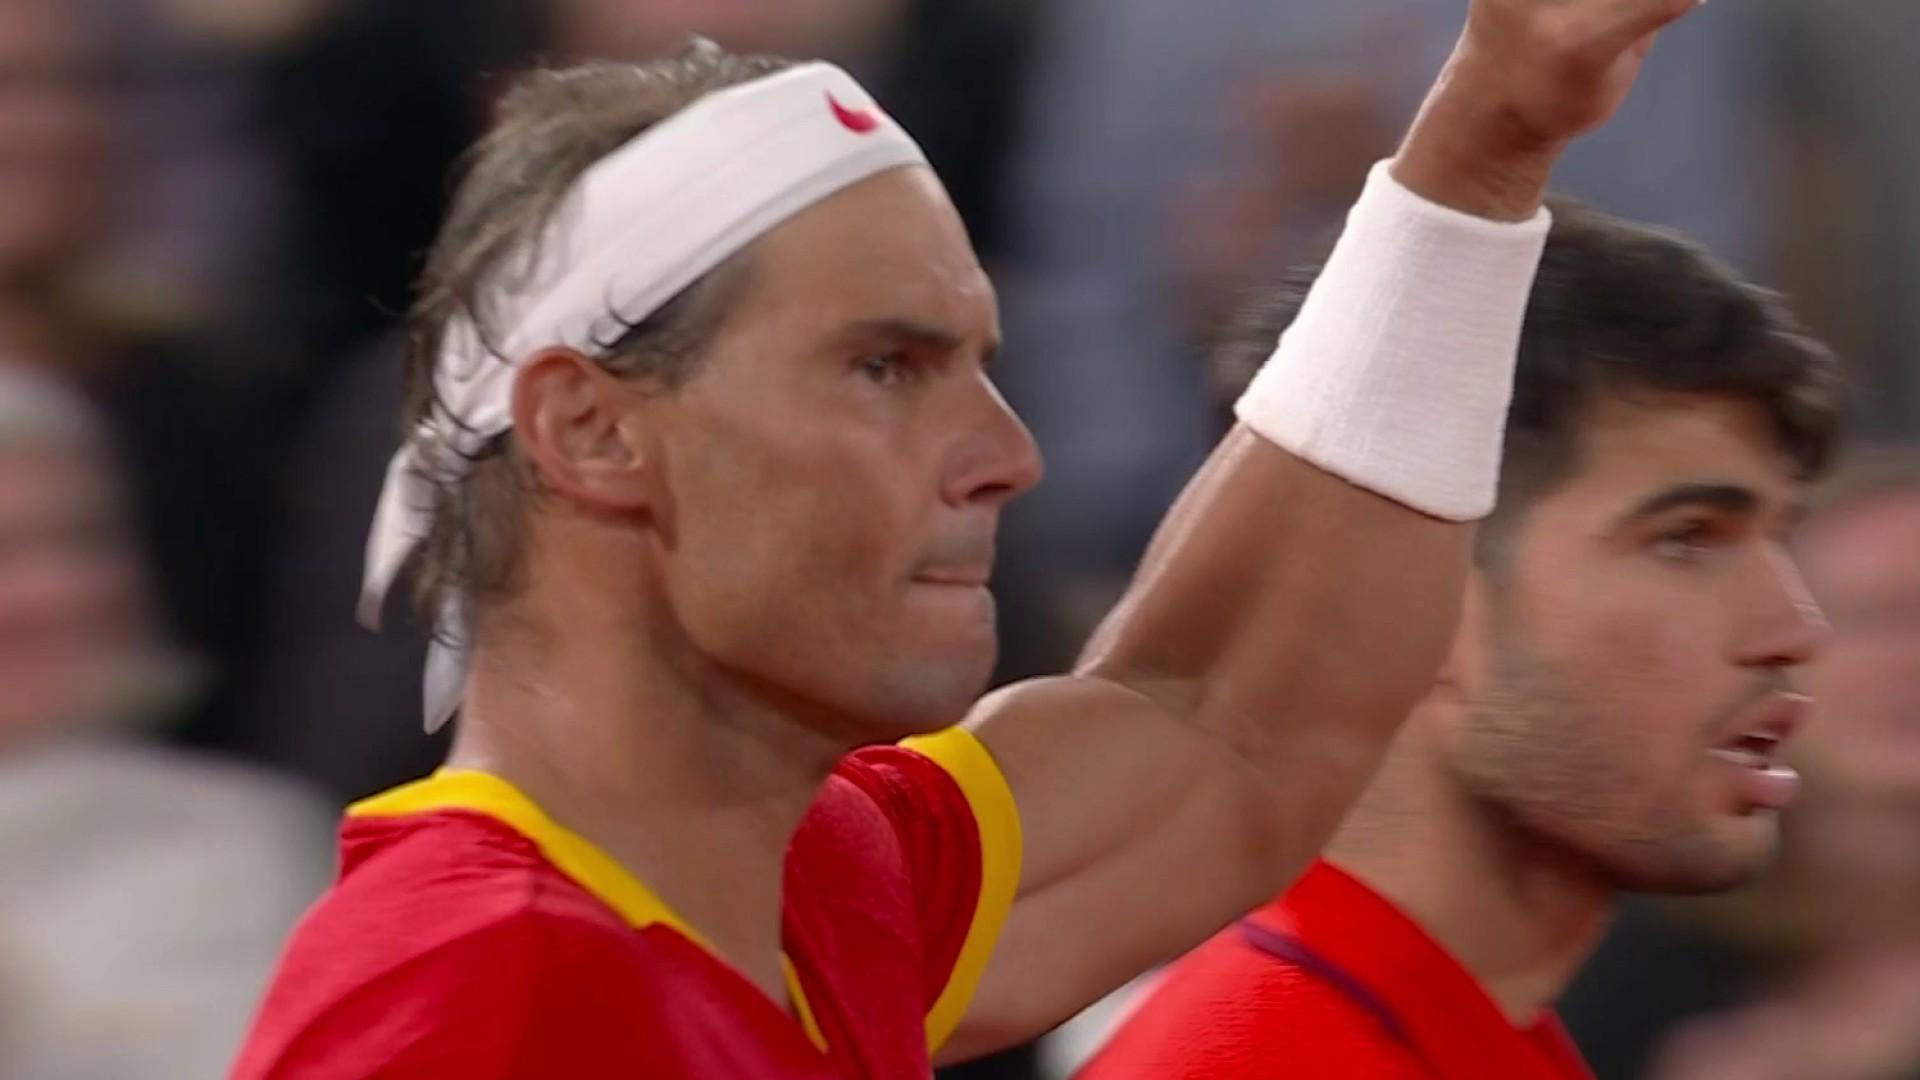 Rafael Nadal and Carlos Alcaraz won their first doubles match on Saturday July 27 at the Olympic tennis tournament.